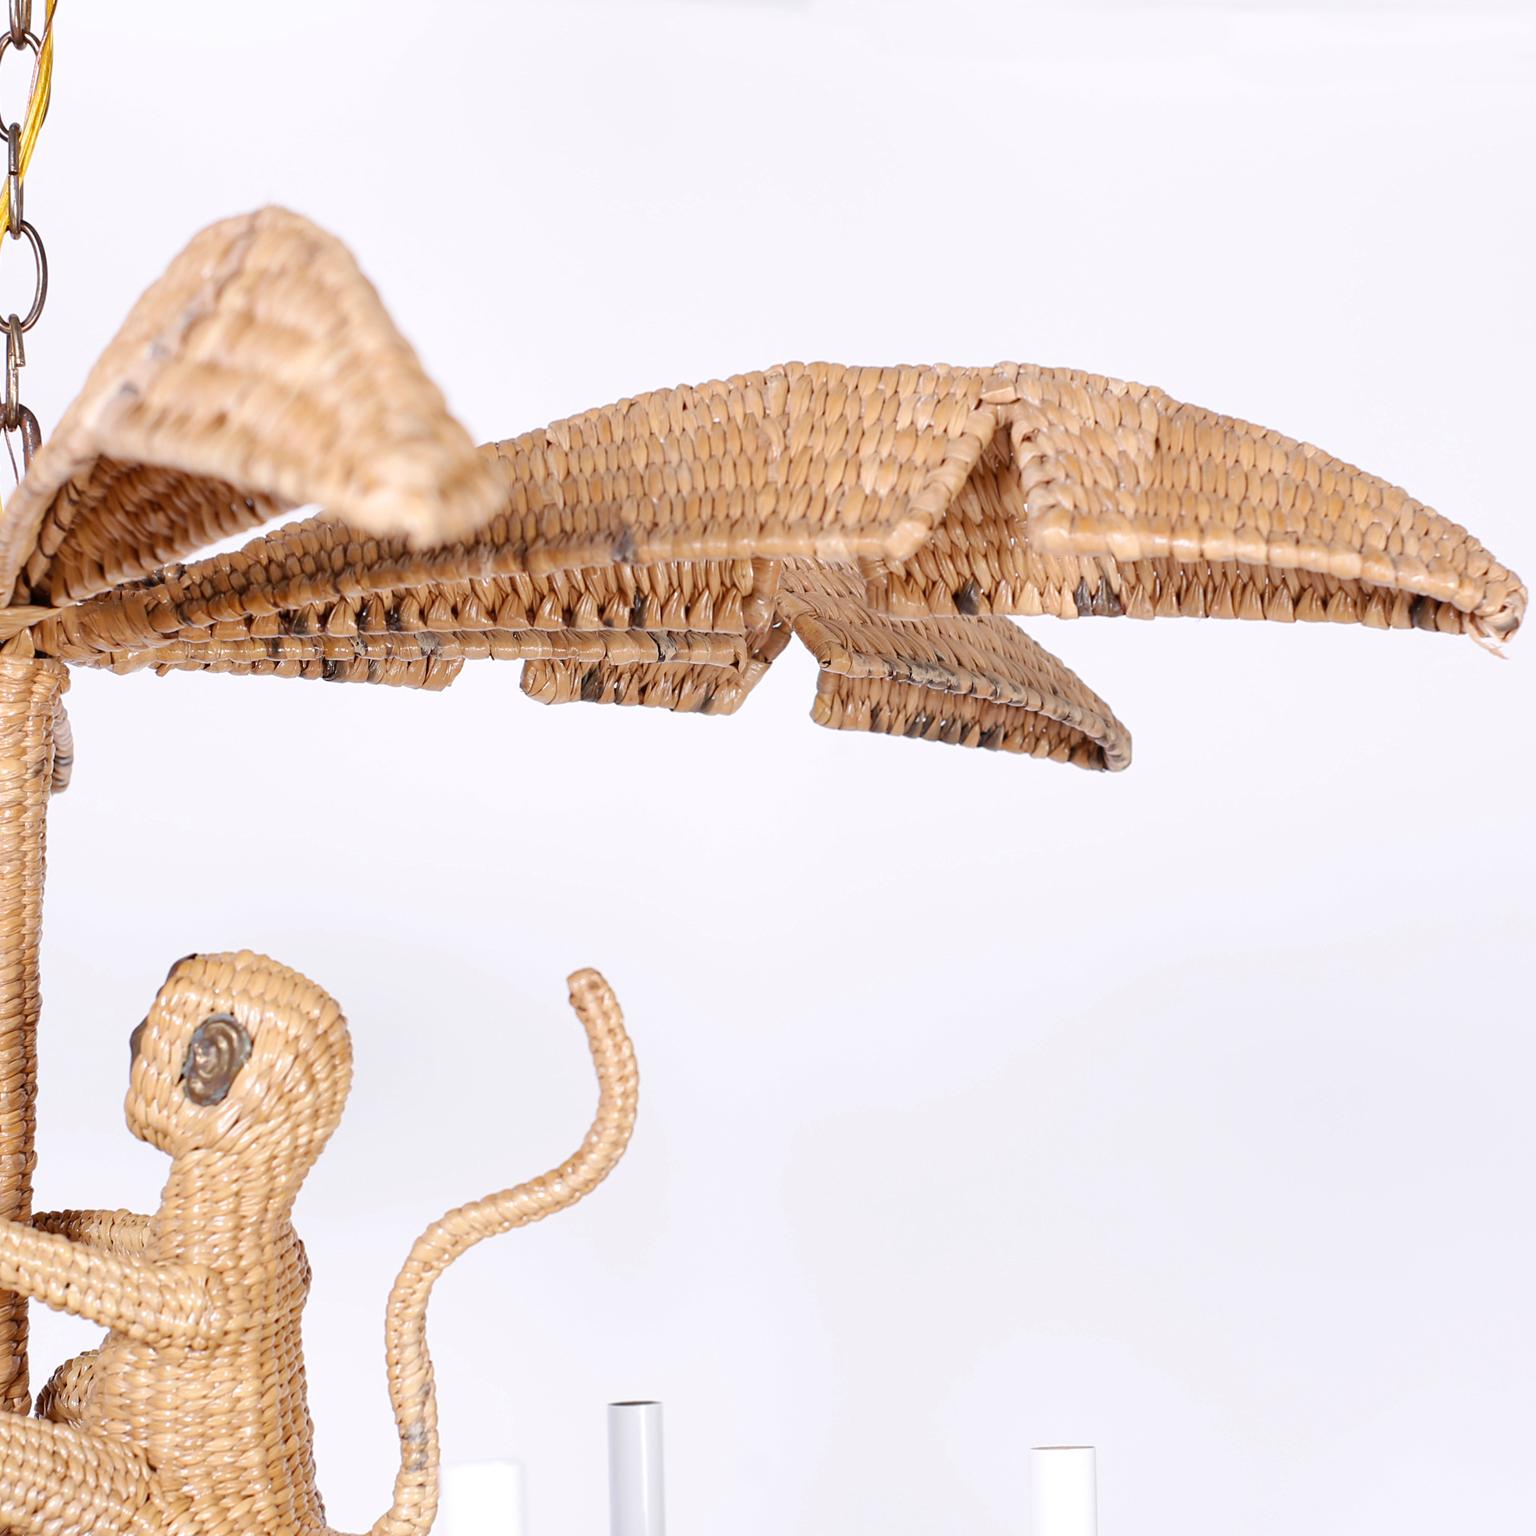 Mario Torres wicker or chuspata chandelier with a palm leaf top, climbing monkey, and six lights with copper branches divided by palm leaves.